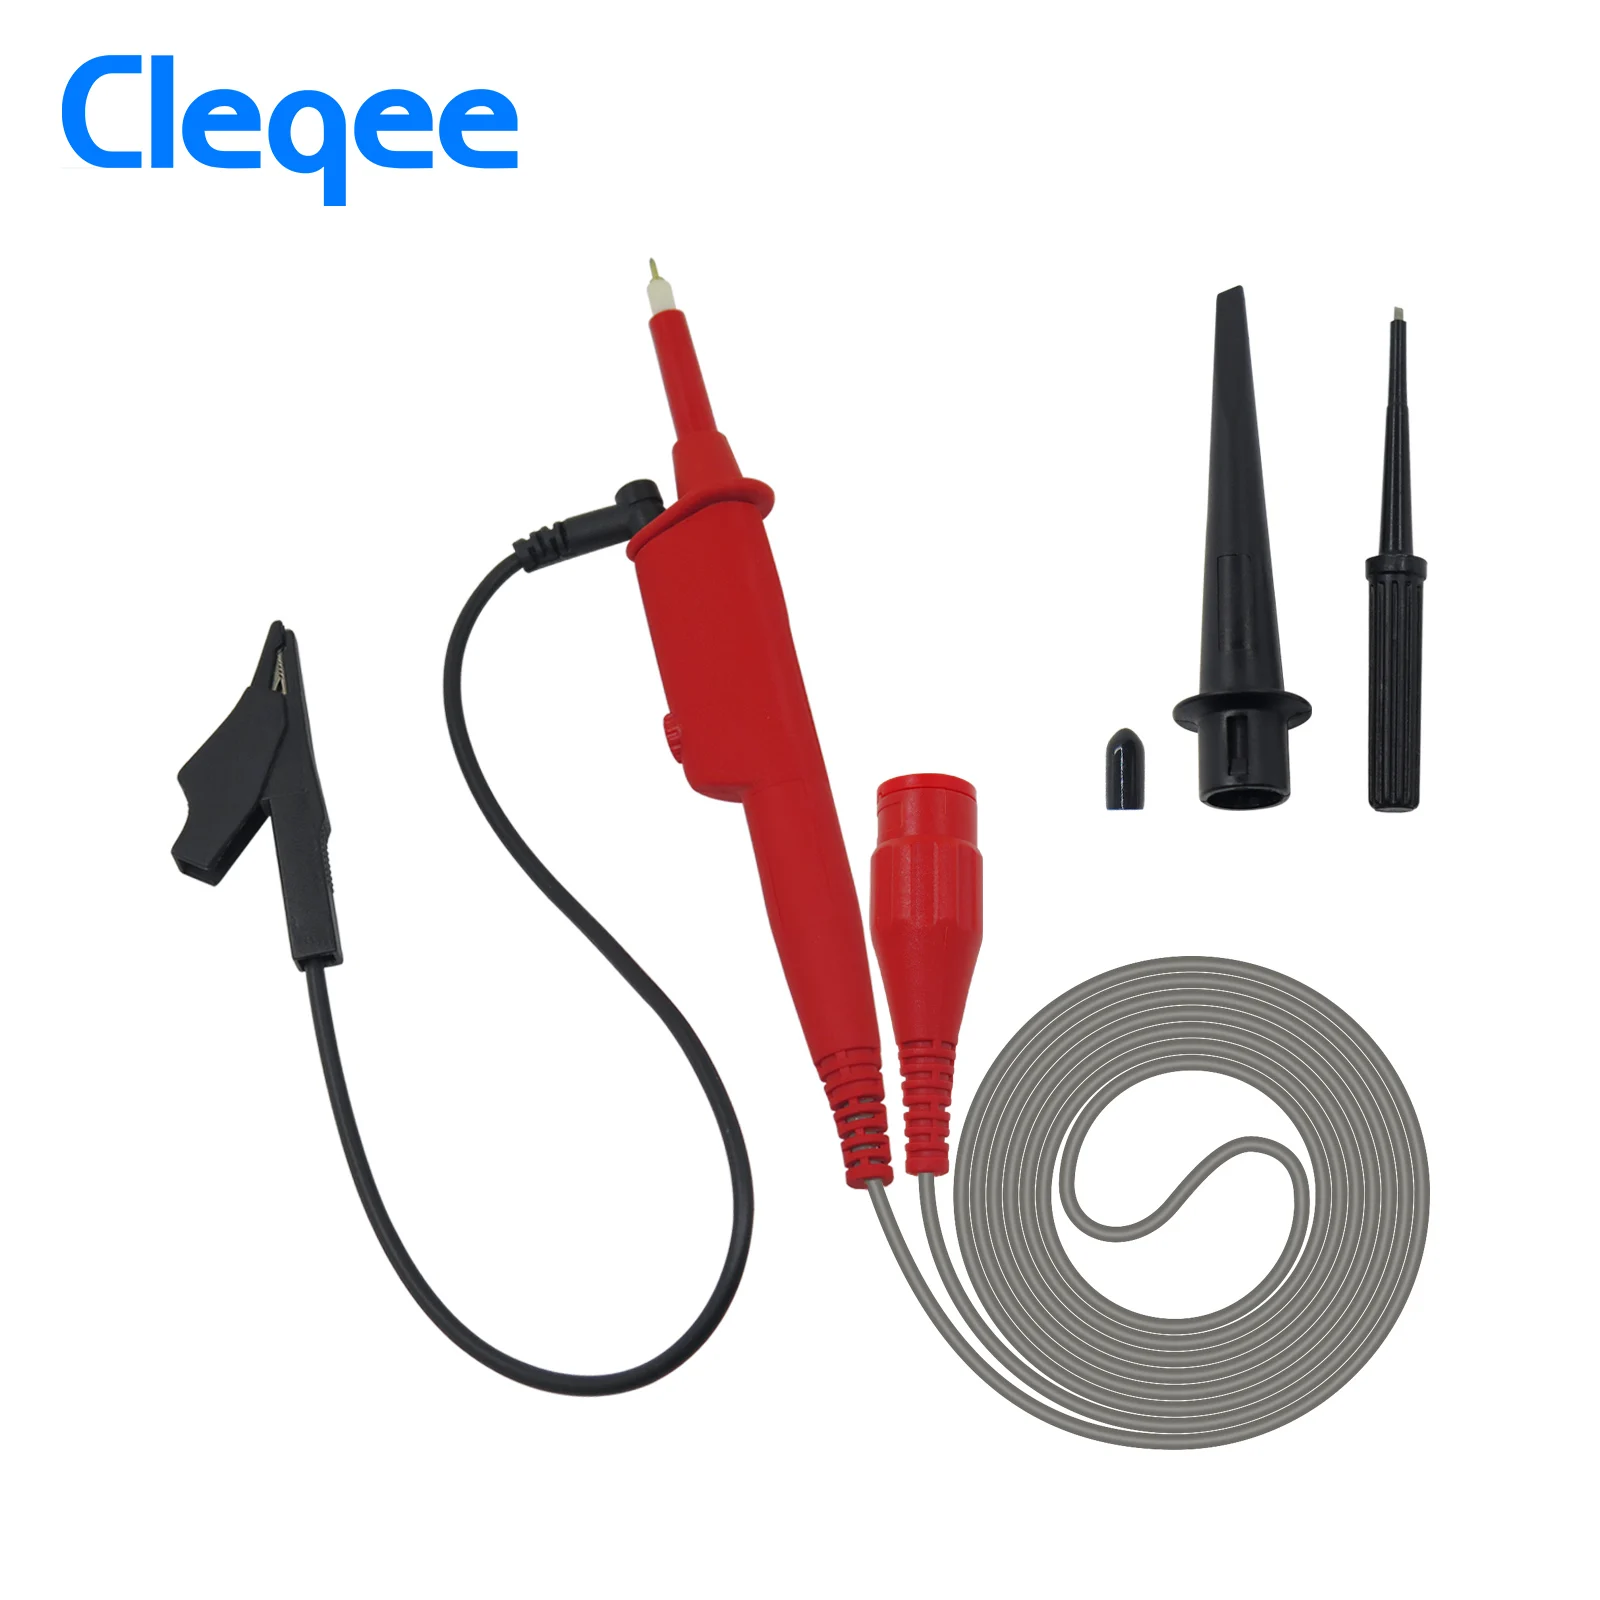 

Cleqee P2301C 100X Oscilloscope Probe 100:1 High Voltage Withstand 5KV 300MHz For Oscilloscope Tektronix HP Worldwide